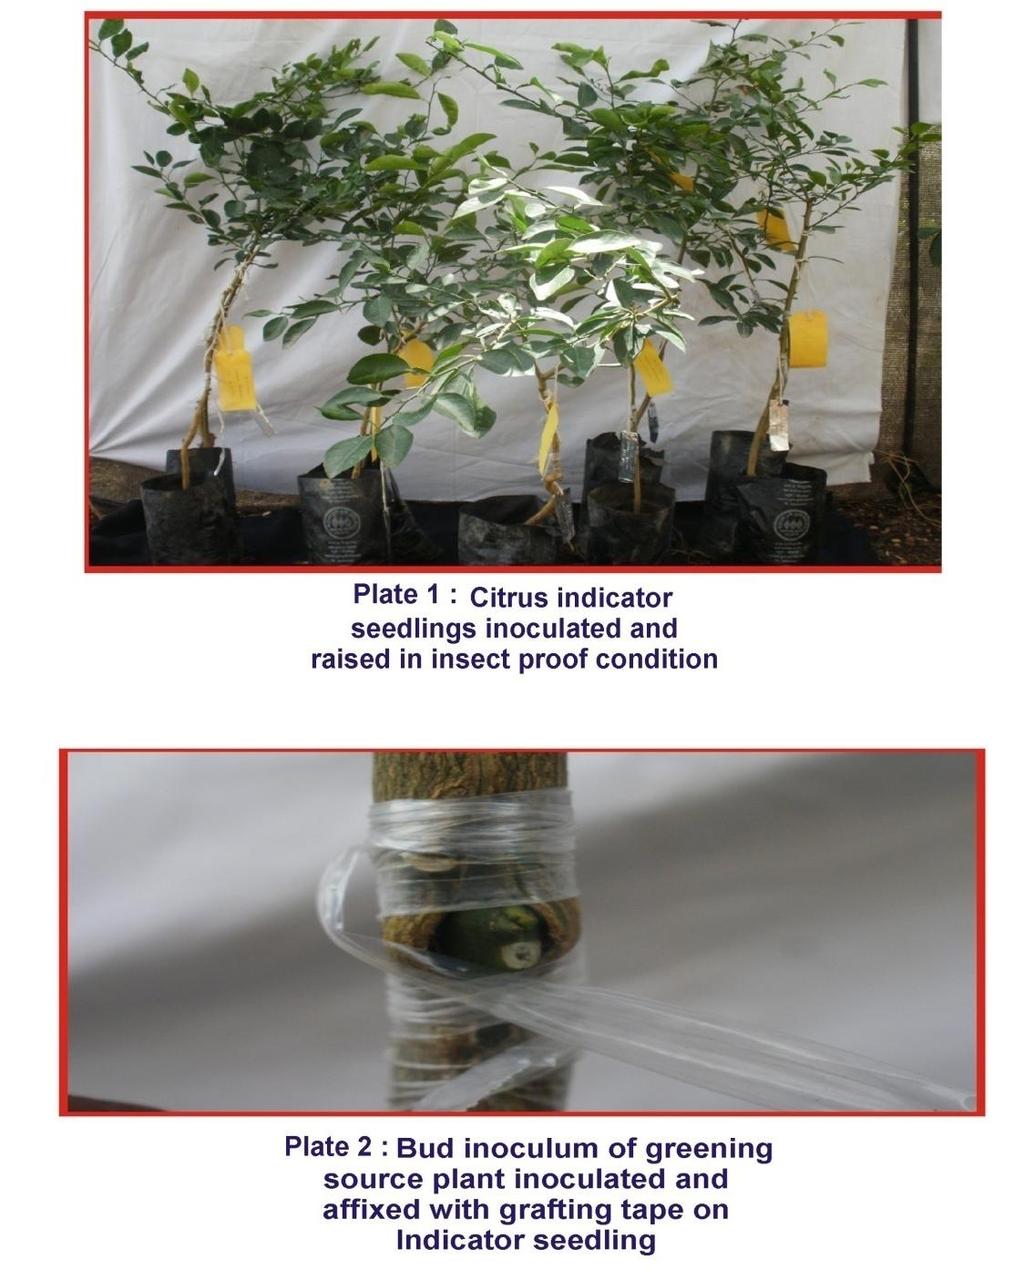 tissue grafting and its detection is made by indexing on indicator plants like sweet orange and acid lime, and is the practical method for confirmation for its presence in field trees (Nariani, 1985).